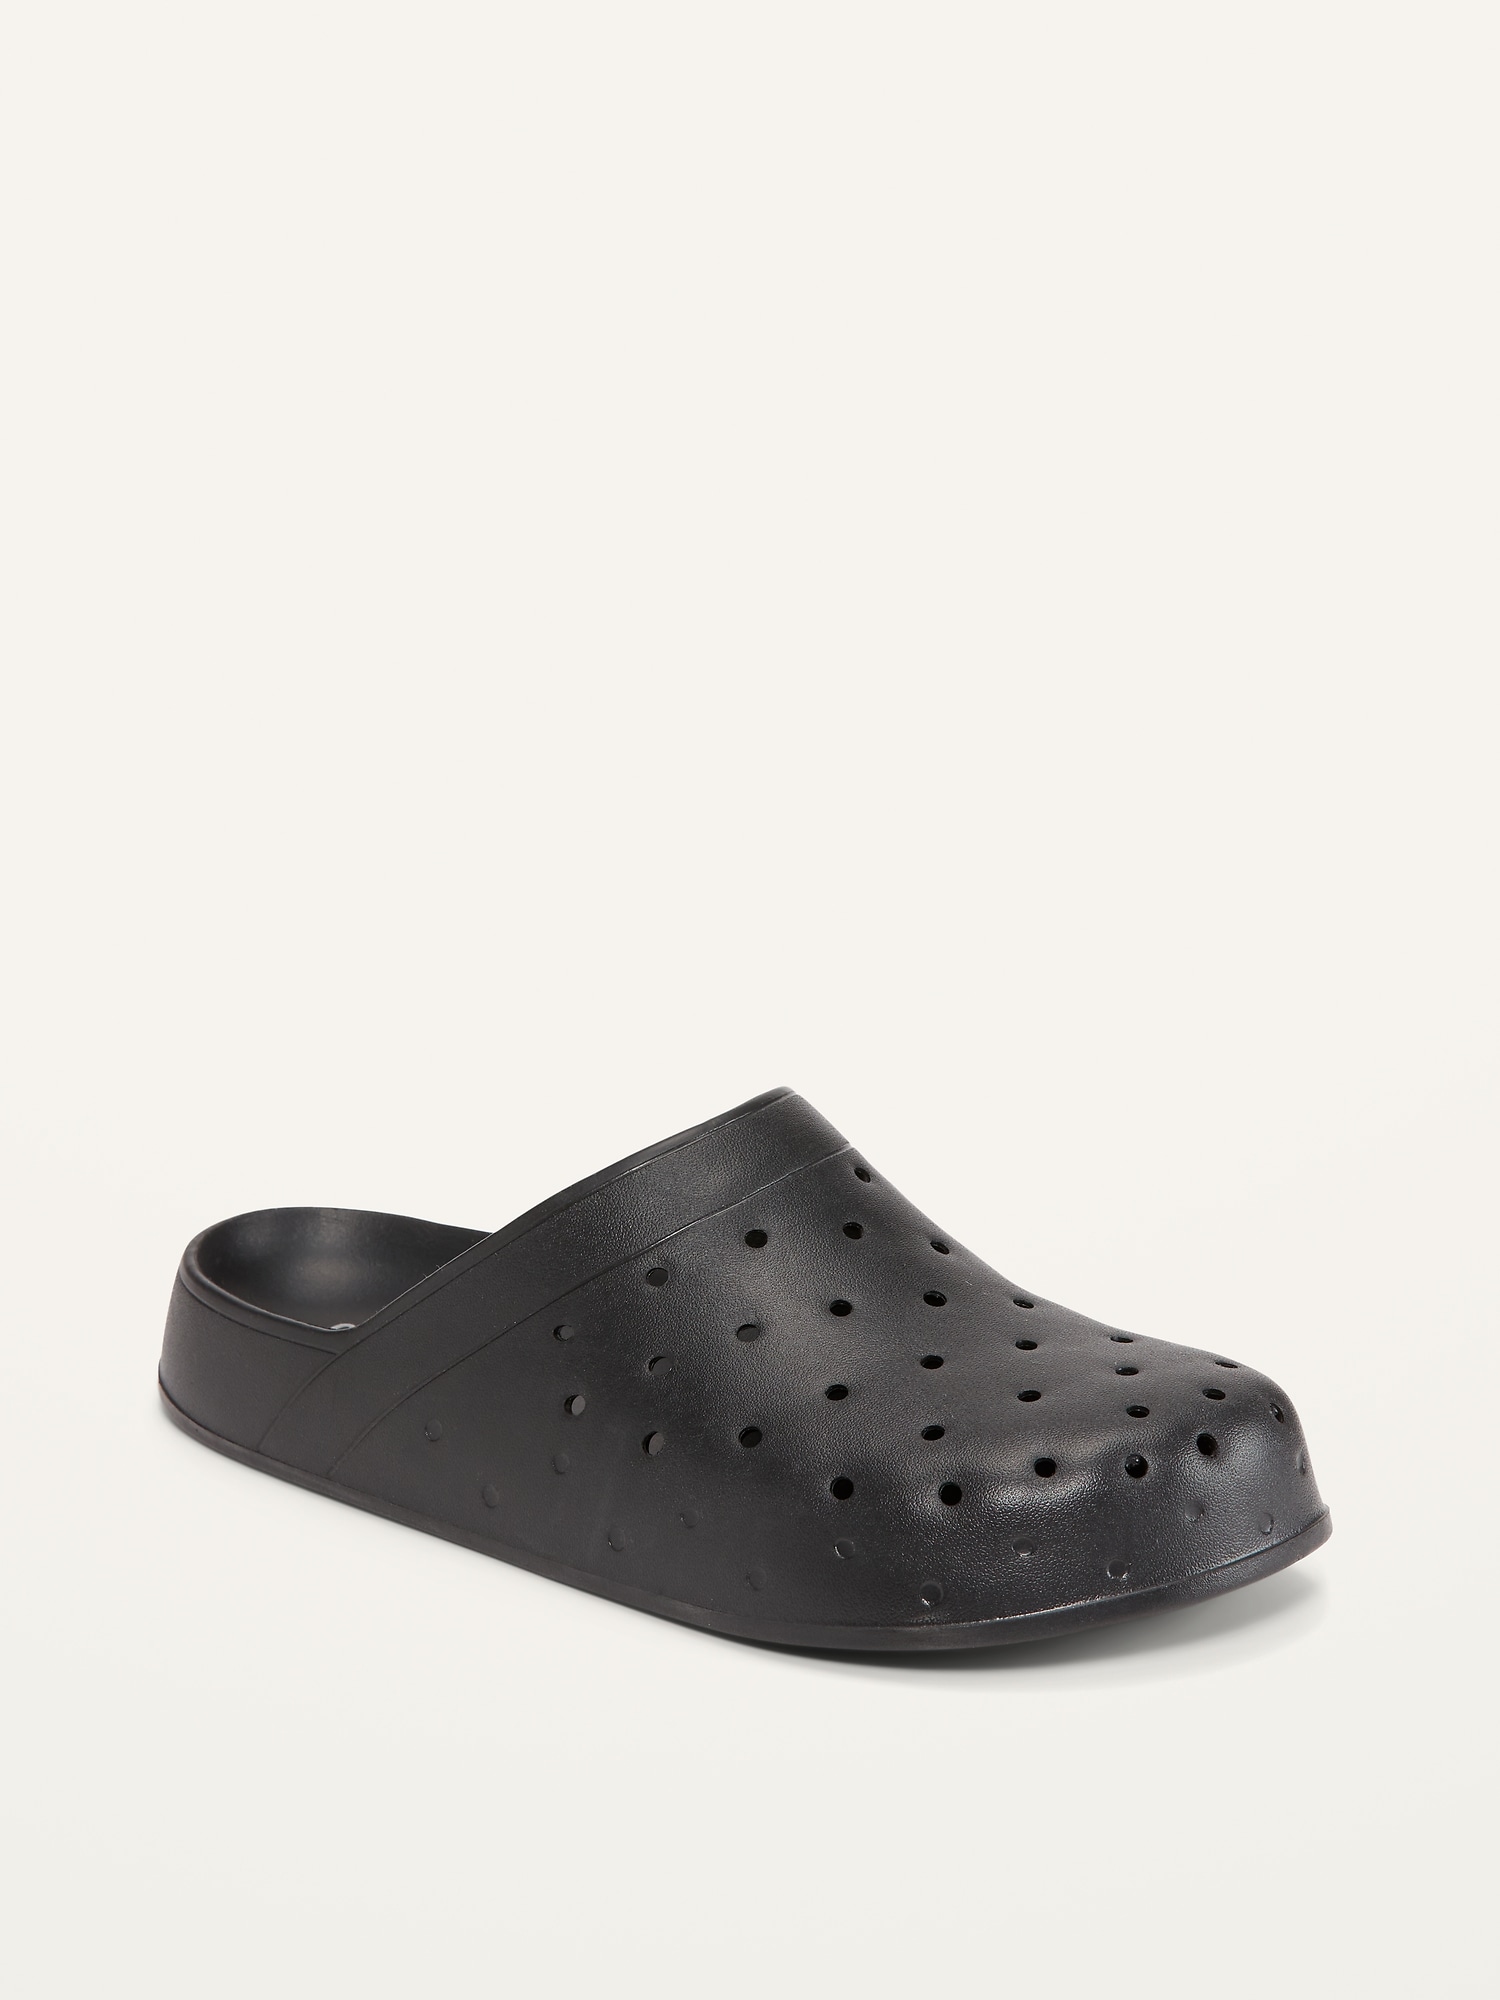 Old Navy Perforated Clog Shoes (Partially Plant-Based) black. 1